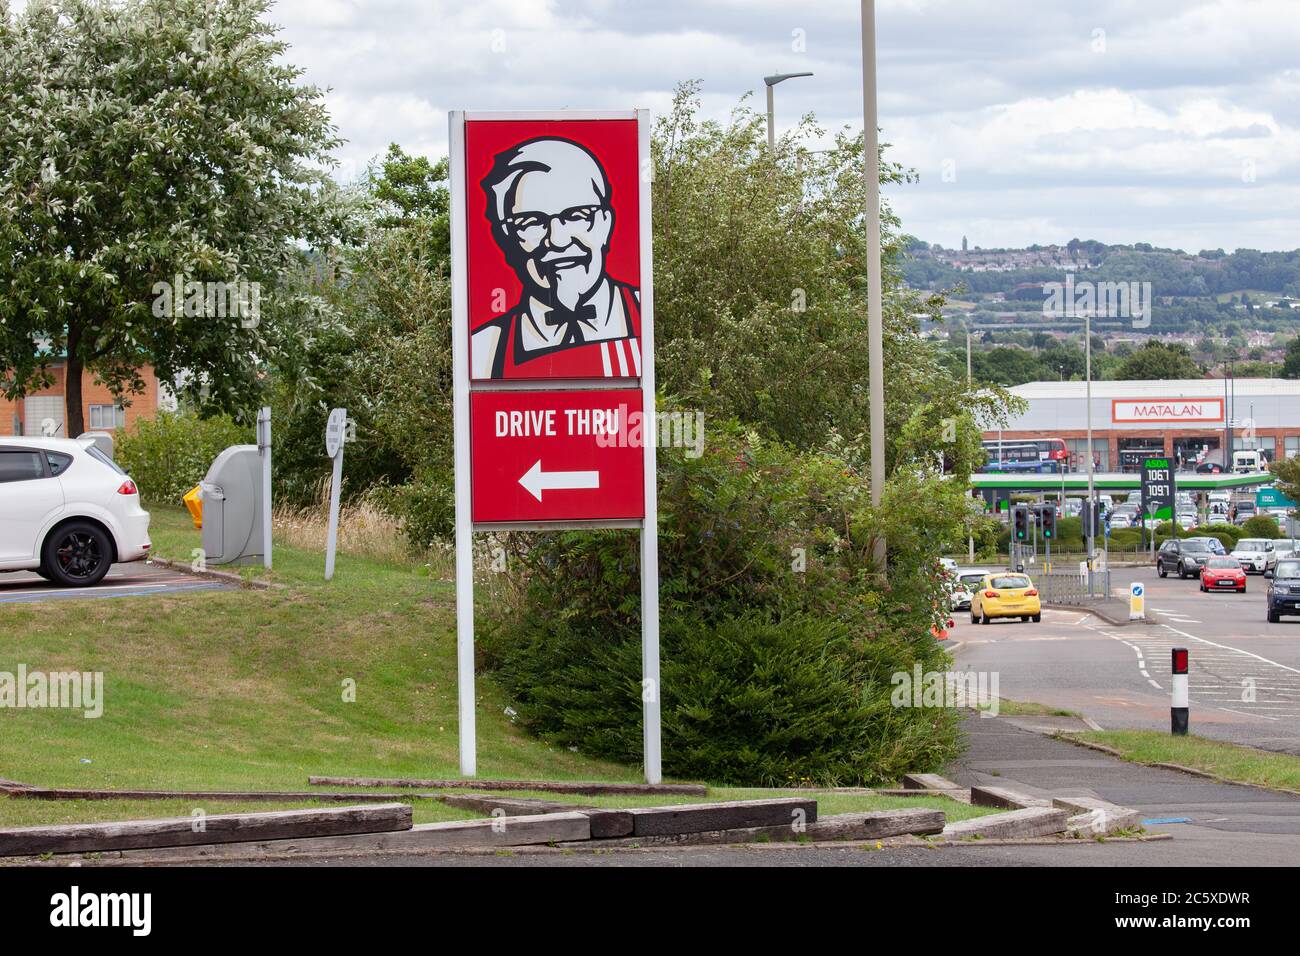 KFC Drive Thru sign with Matalan in the background. Merryhill Shopping Centre. 5th July 2020. West Midlands. UK Stock Photo